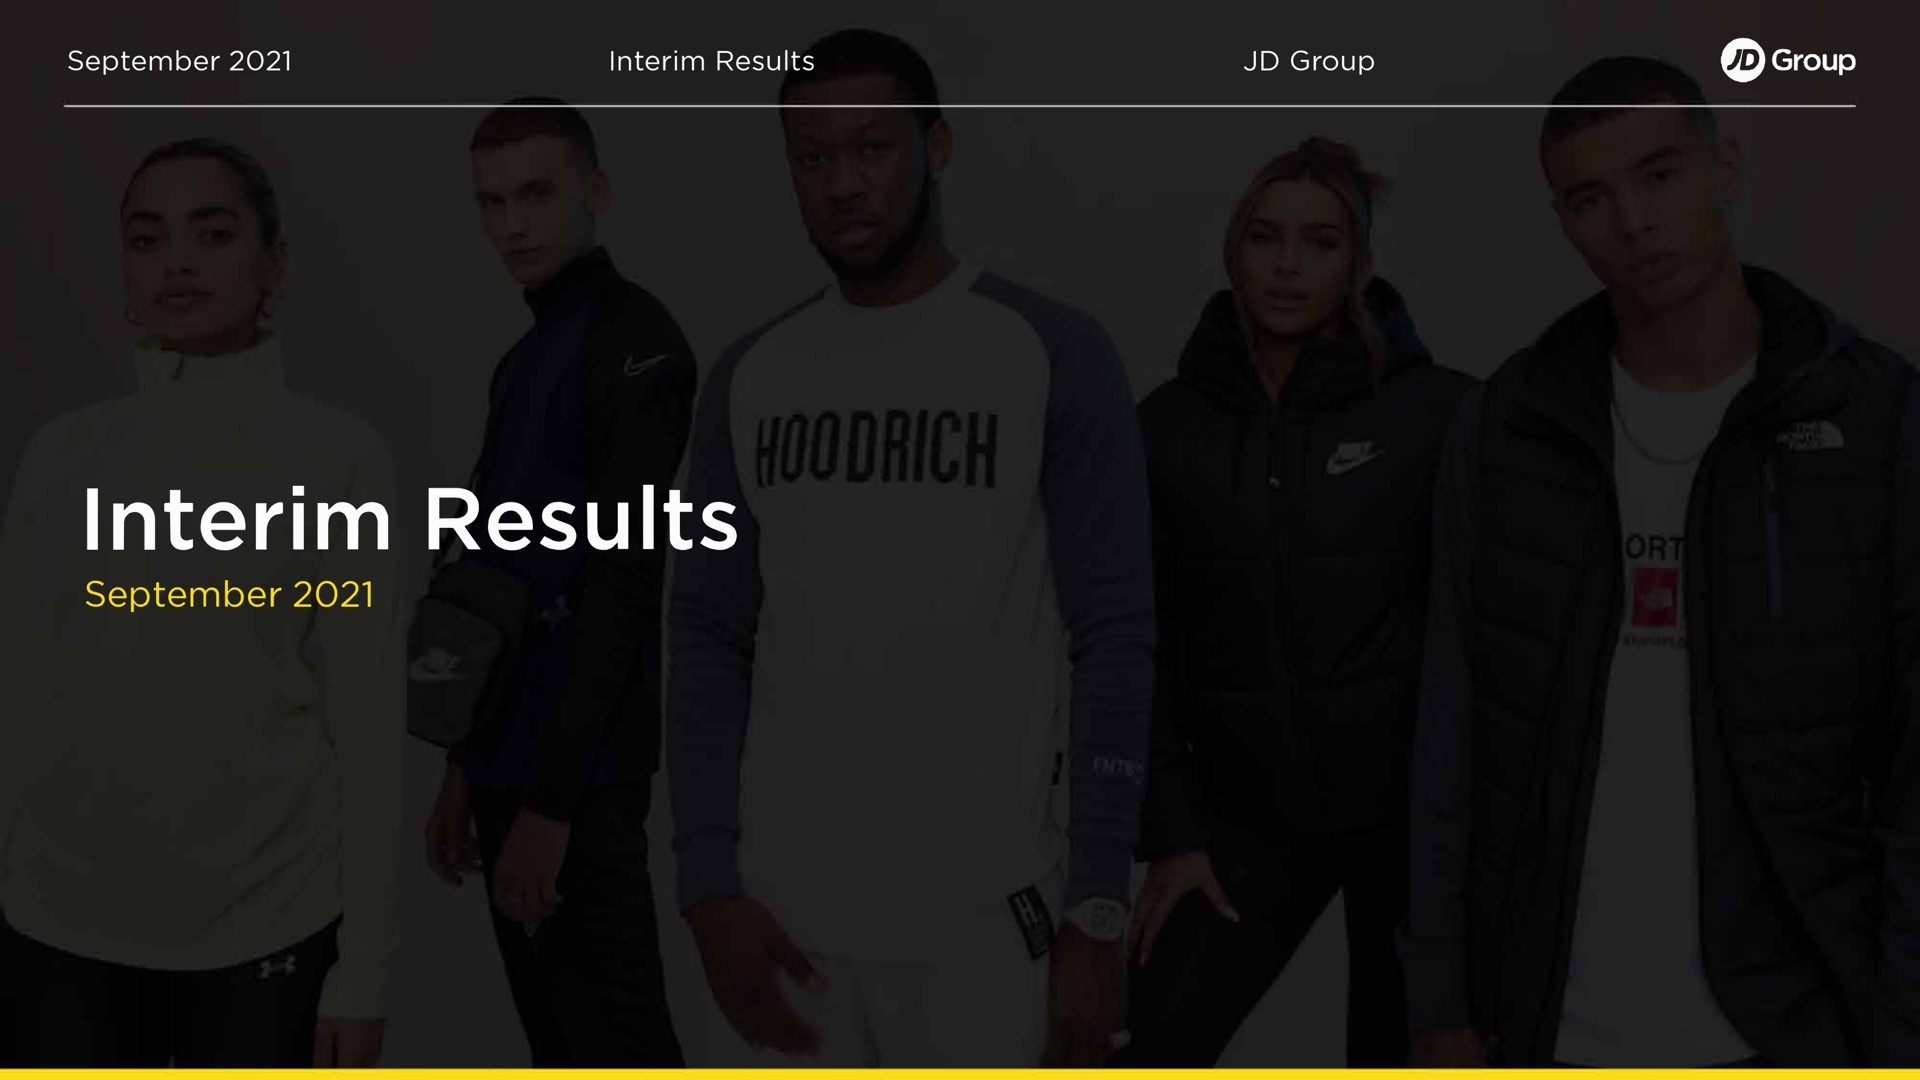 tern ber interim its group group interim its results results | JD Sports